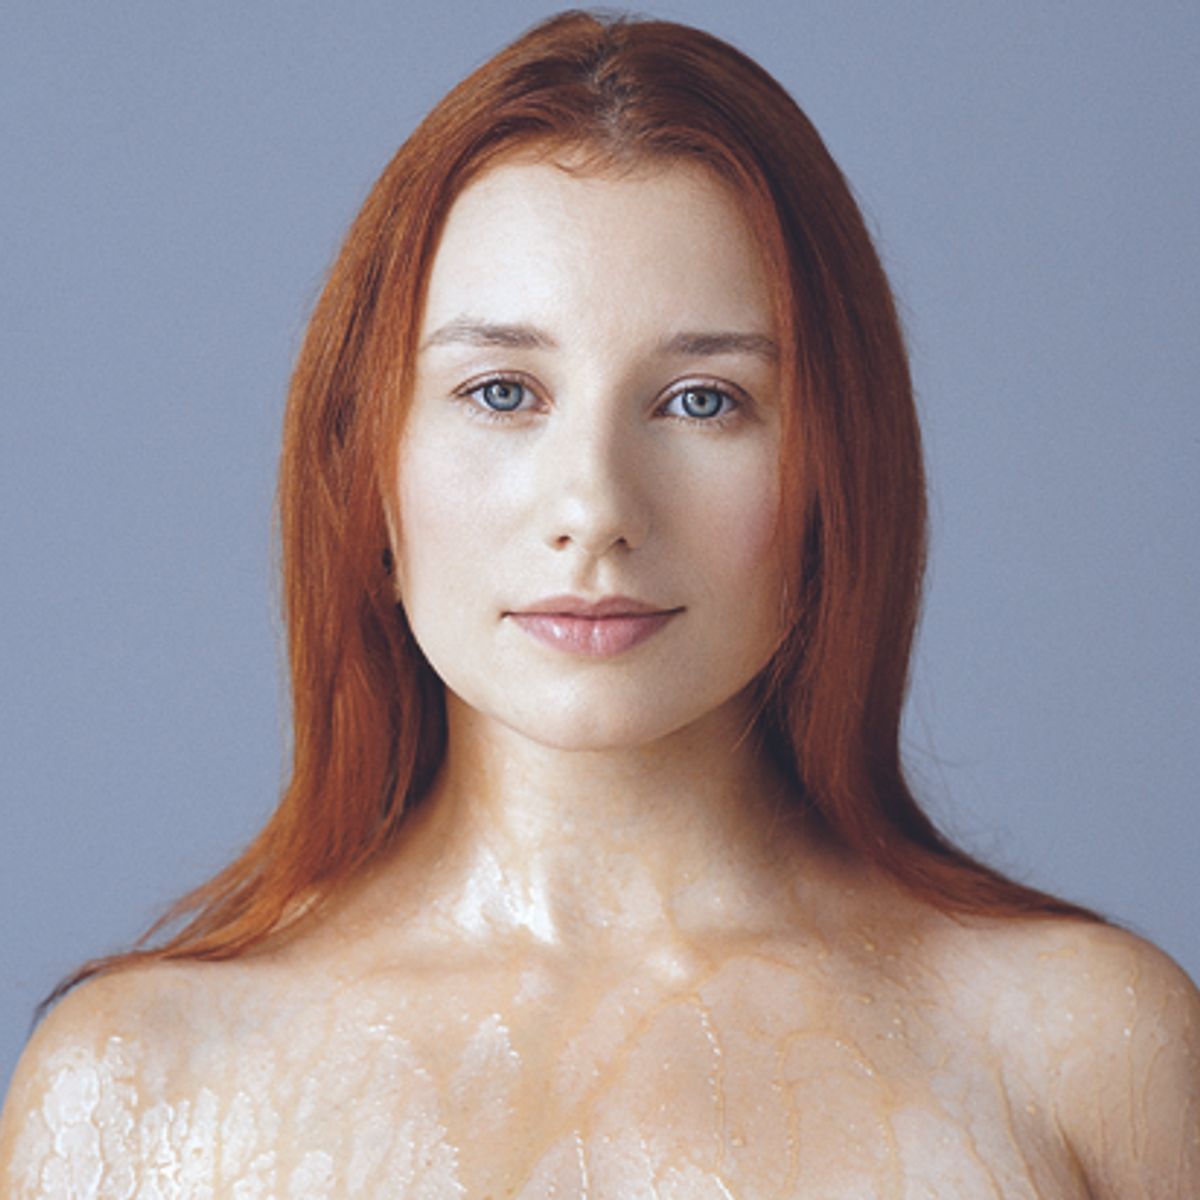 Tori Amos Ears - Tori amos performs the song oysters off the album unrepent...